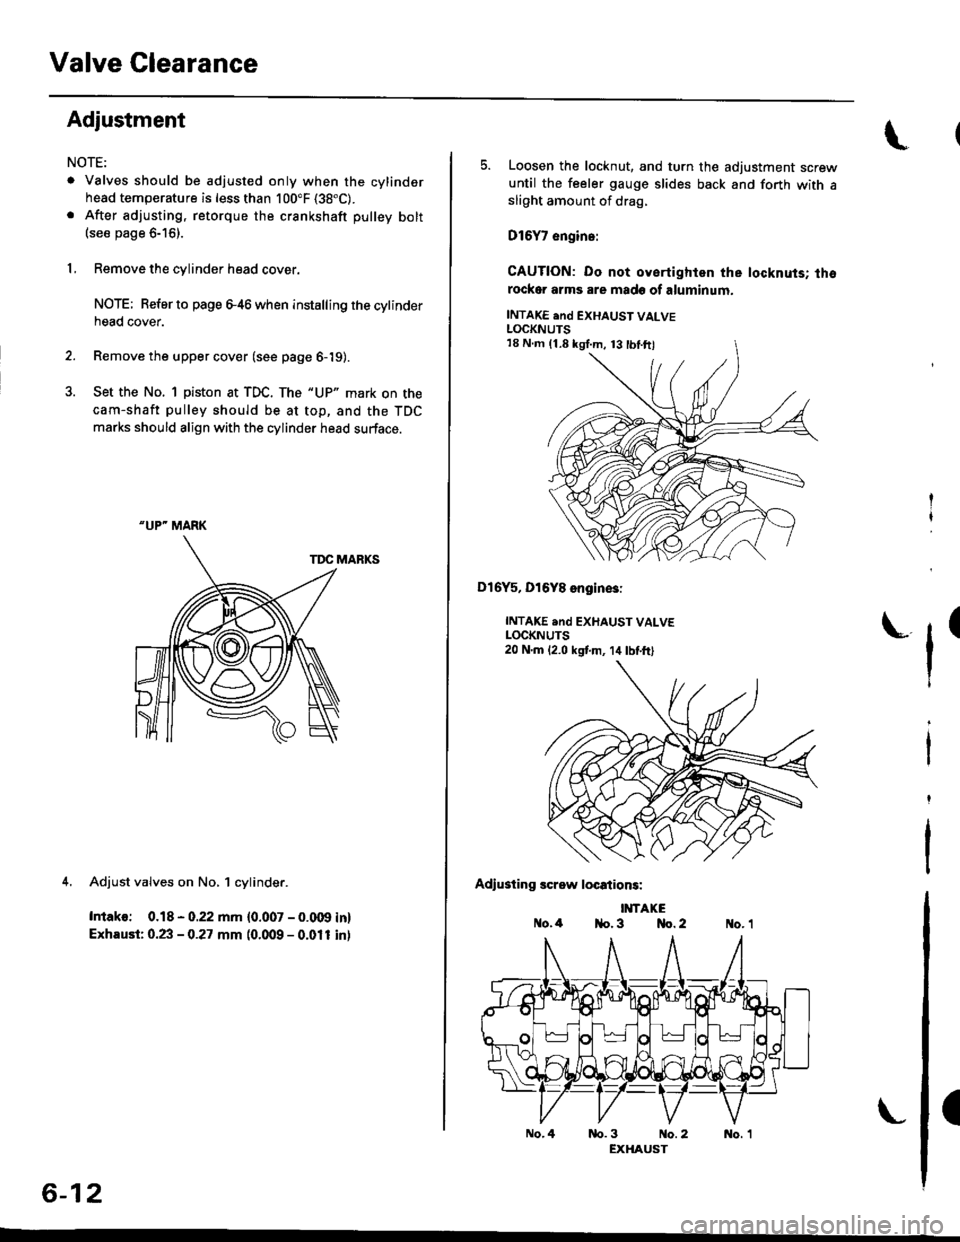 HONDA CIVIC 1998 6.G User Guide Valve Clearance
Adjustment
NOTE:
. Valves should be adjusted only when the cylindsrhead temperature is less than 100"F (38"C).
. After adjusting, retorque the crankshaft pulley bolt(see page 6-16).
1,